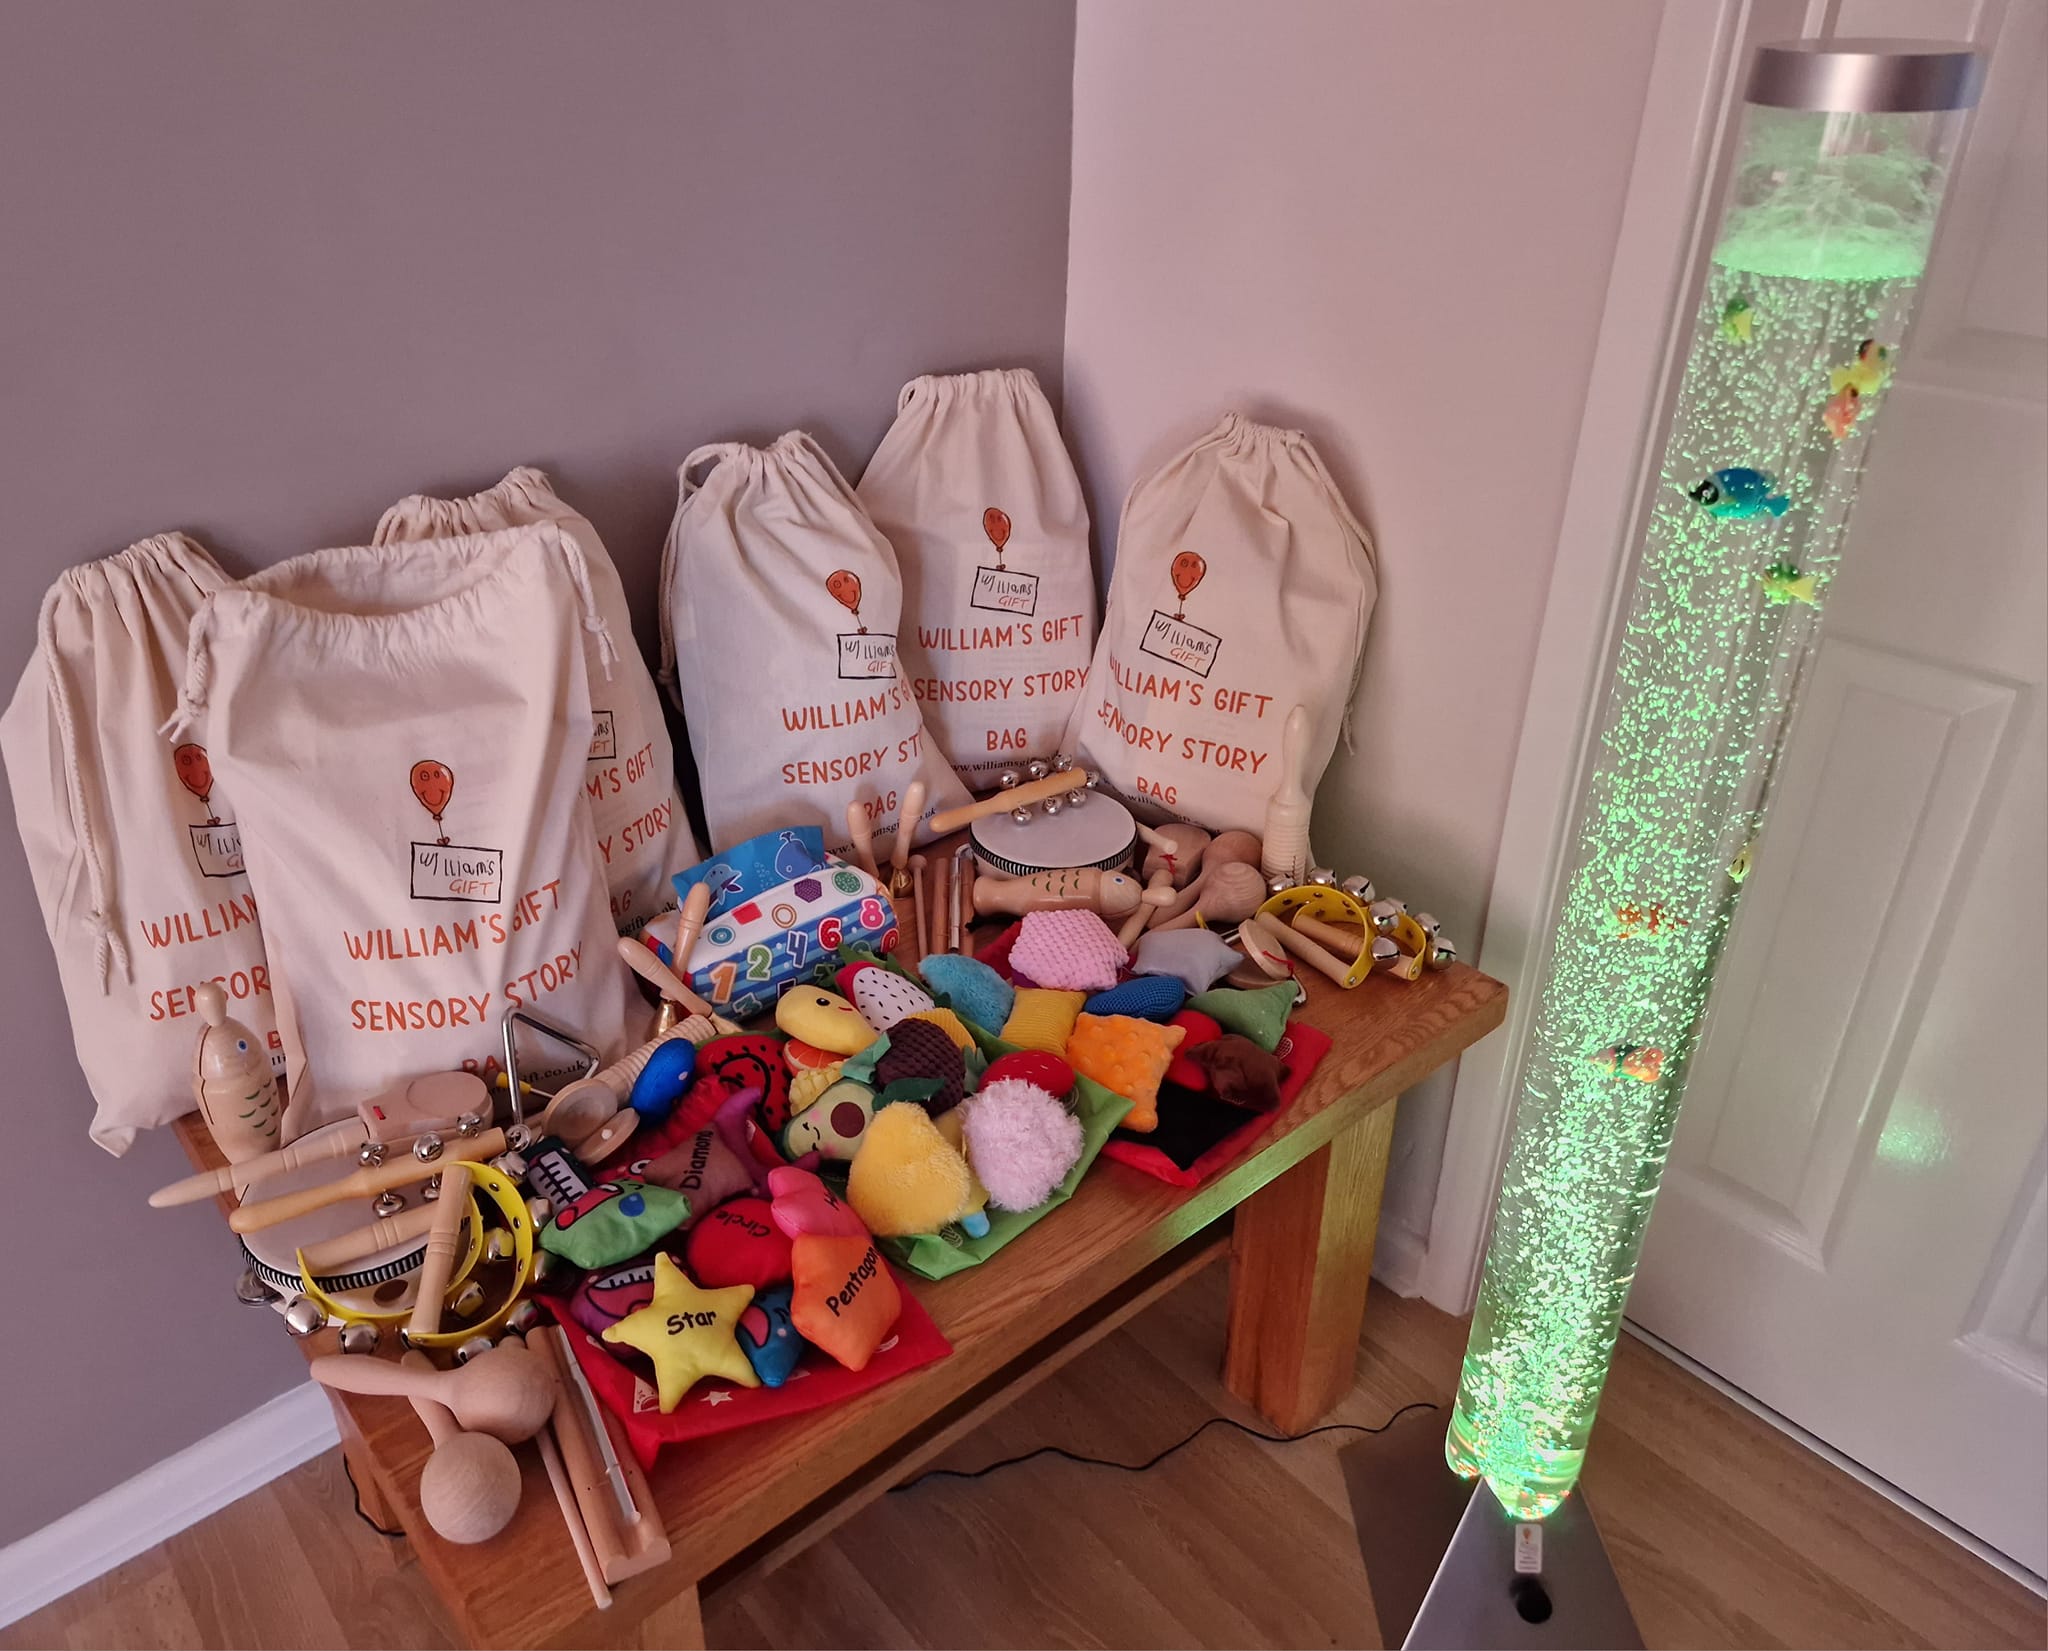 You are currently viewing Another new Launch – William’s Gift Sensory Story Bags